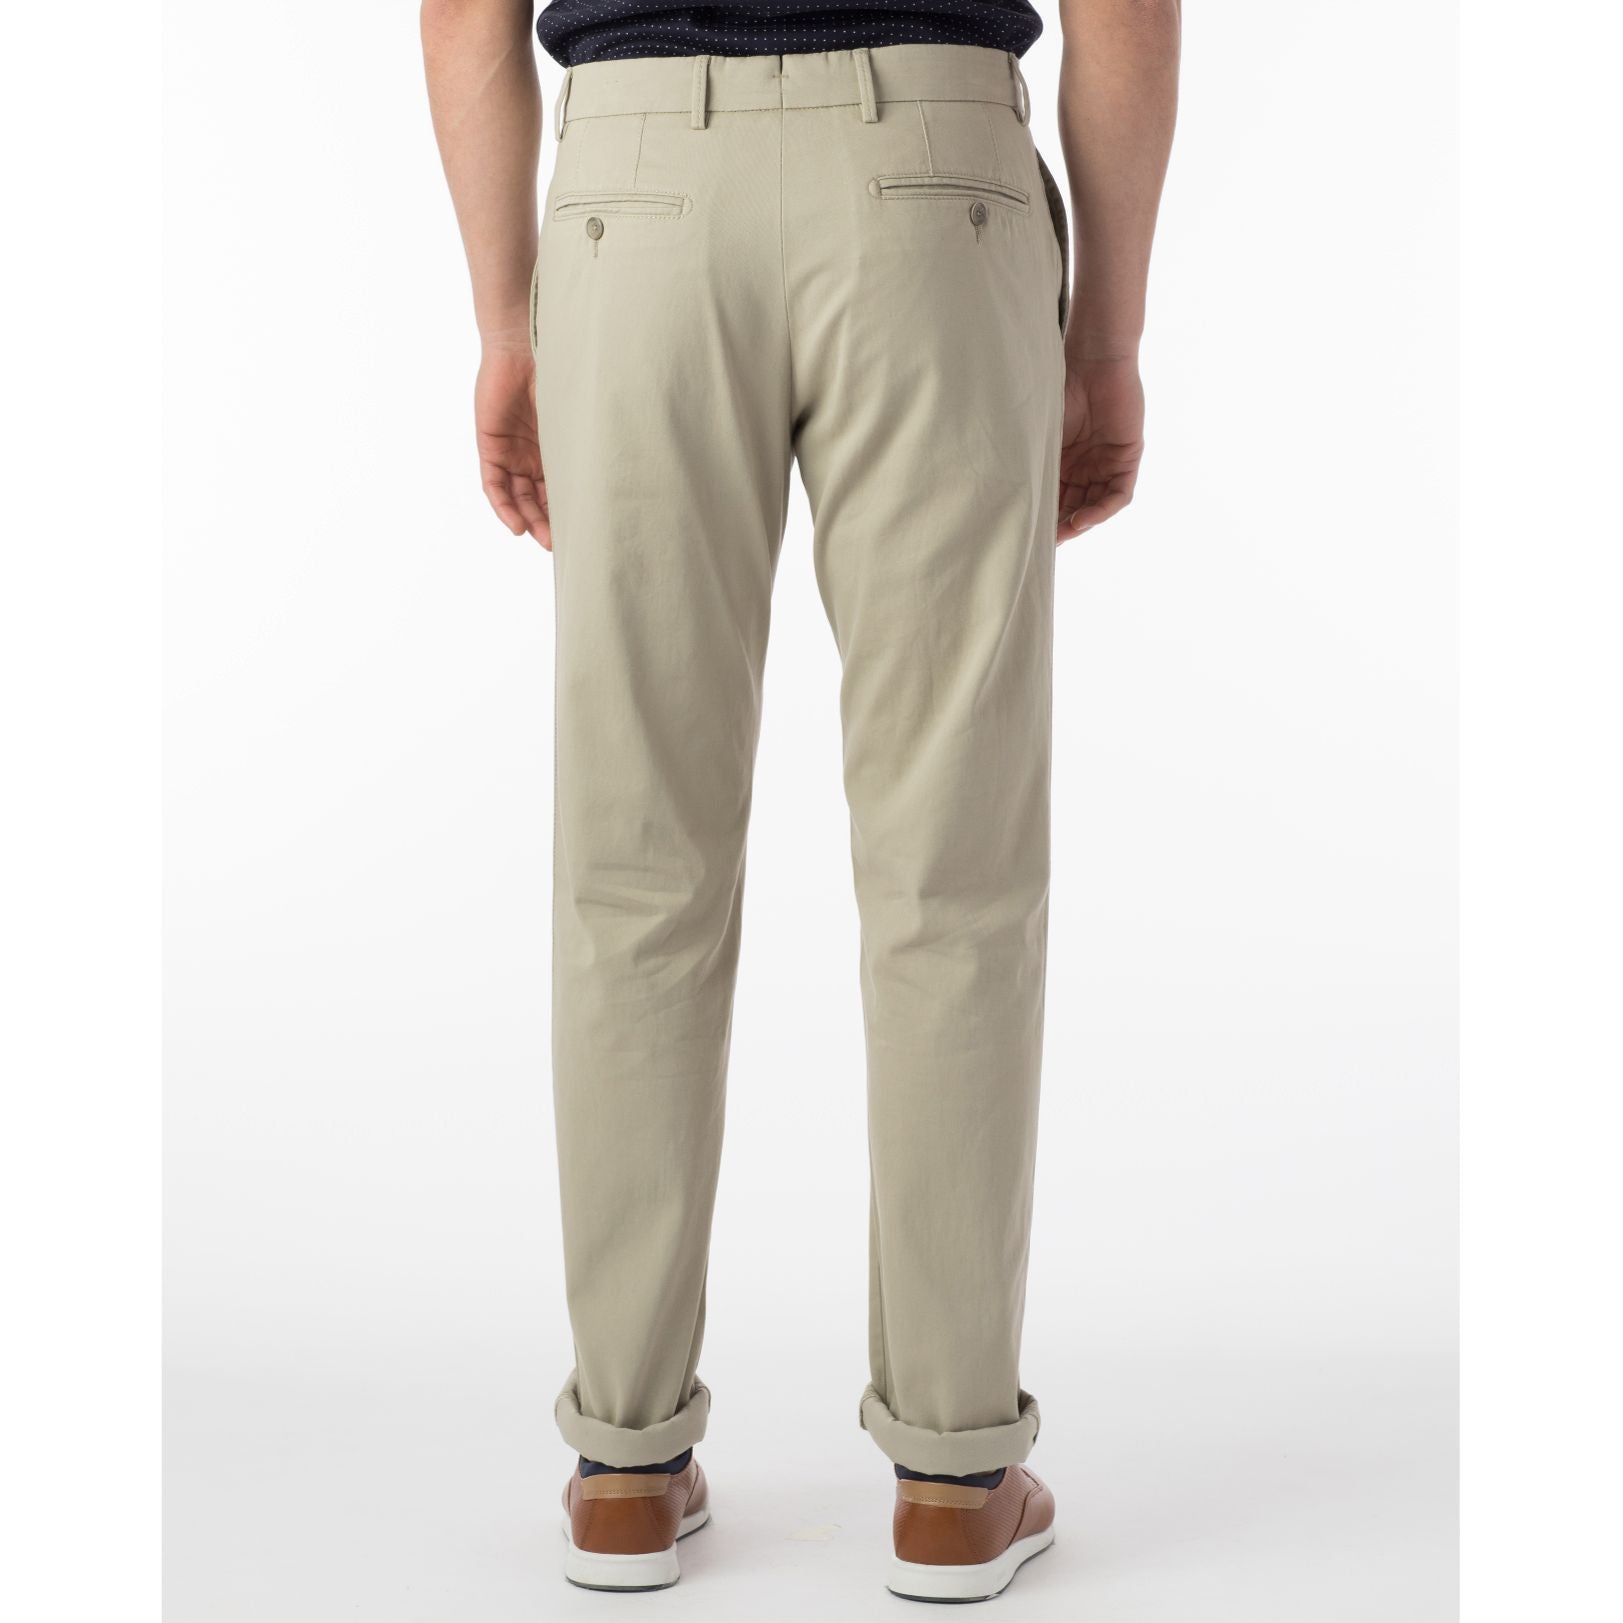 Perma Color Pima Twill Khaki Pants in Stone (Flat Front Models) by Ballin